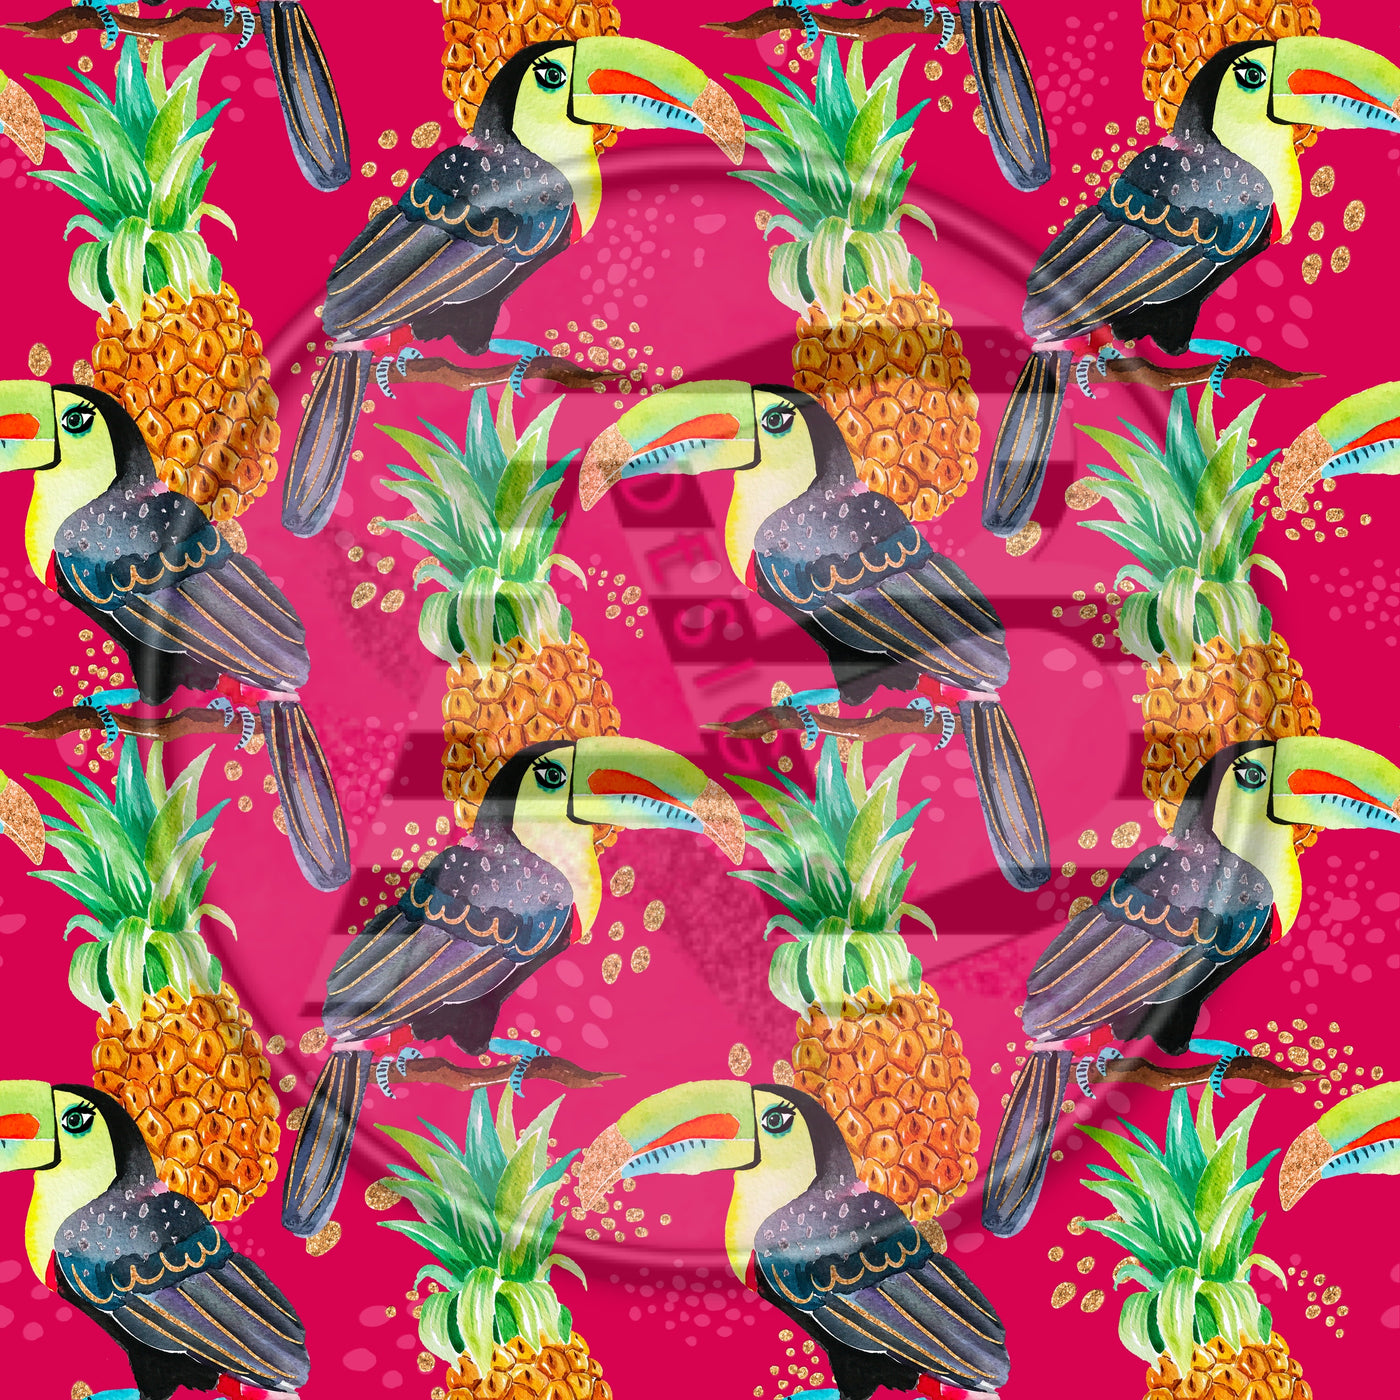 Adhesive Patterned Vinyl - Tropical 706